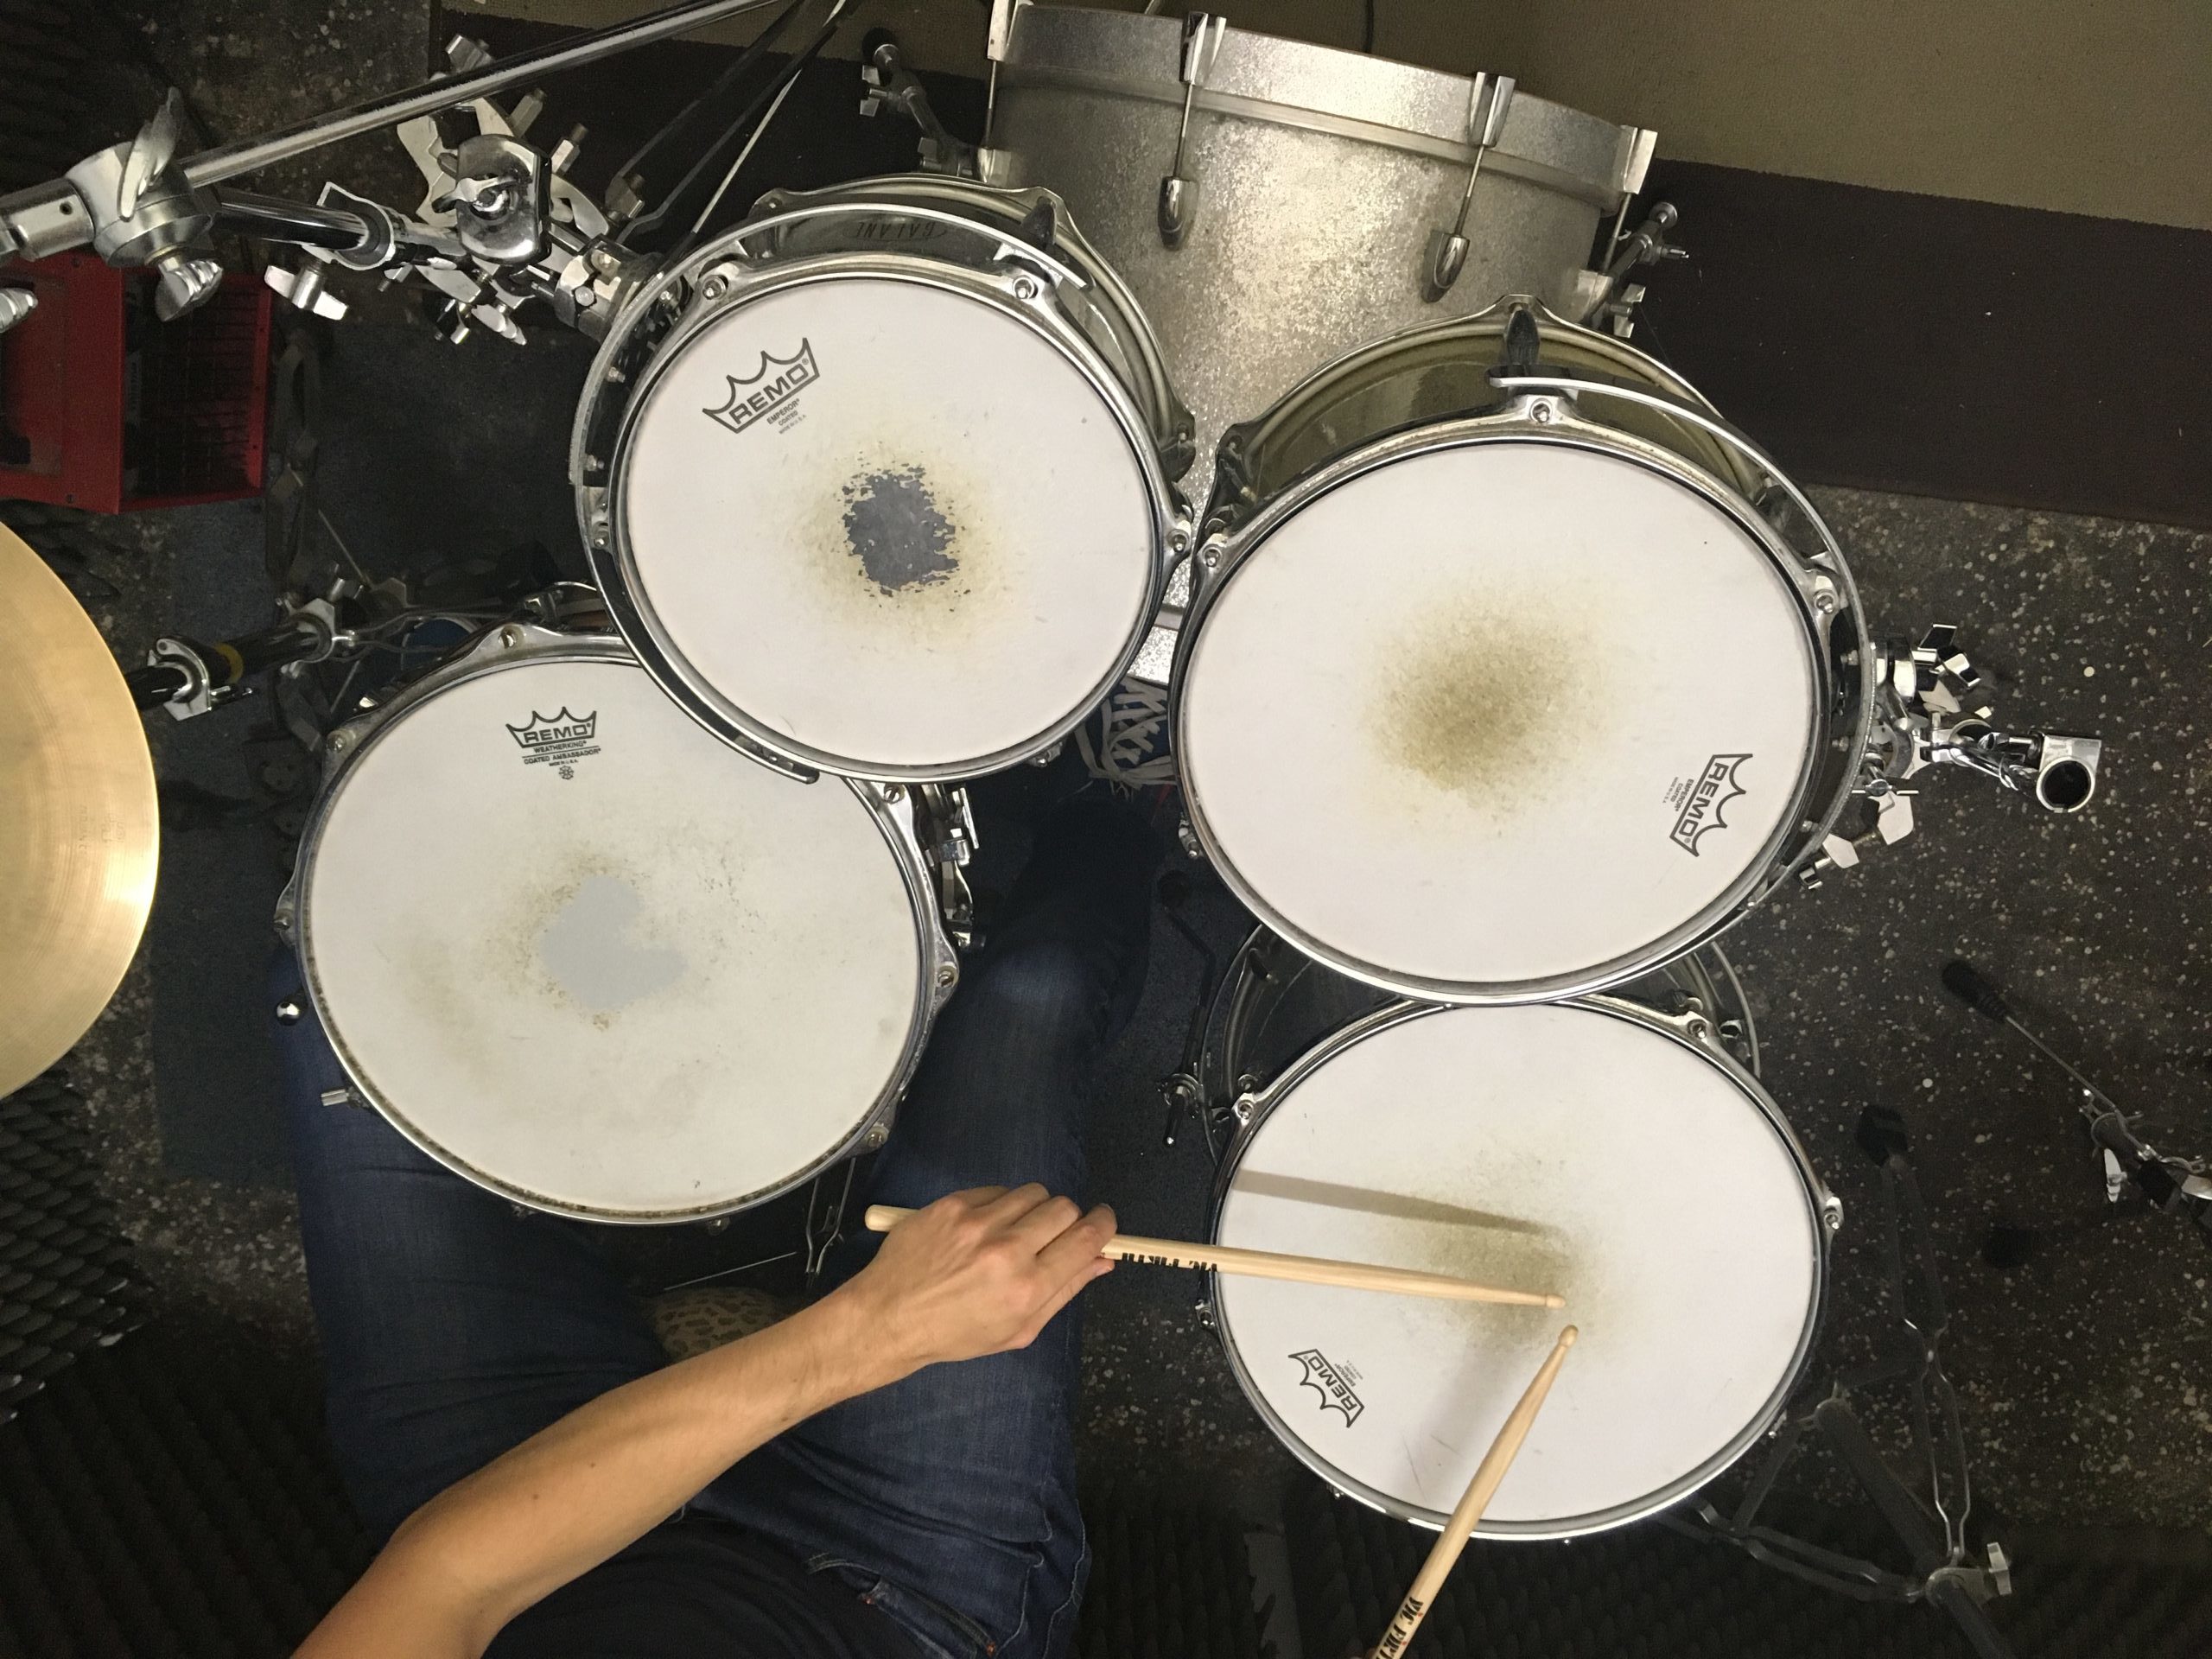 How to set up a drumset: Tom 3